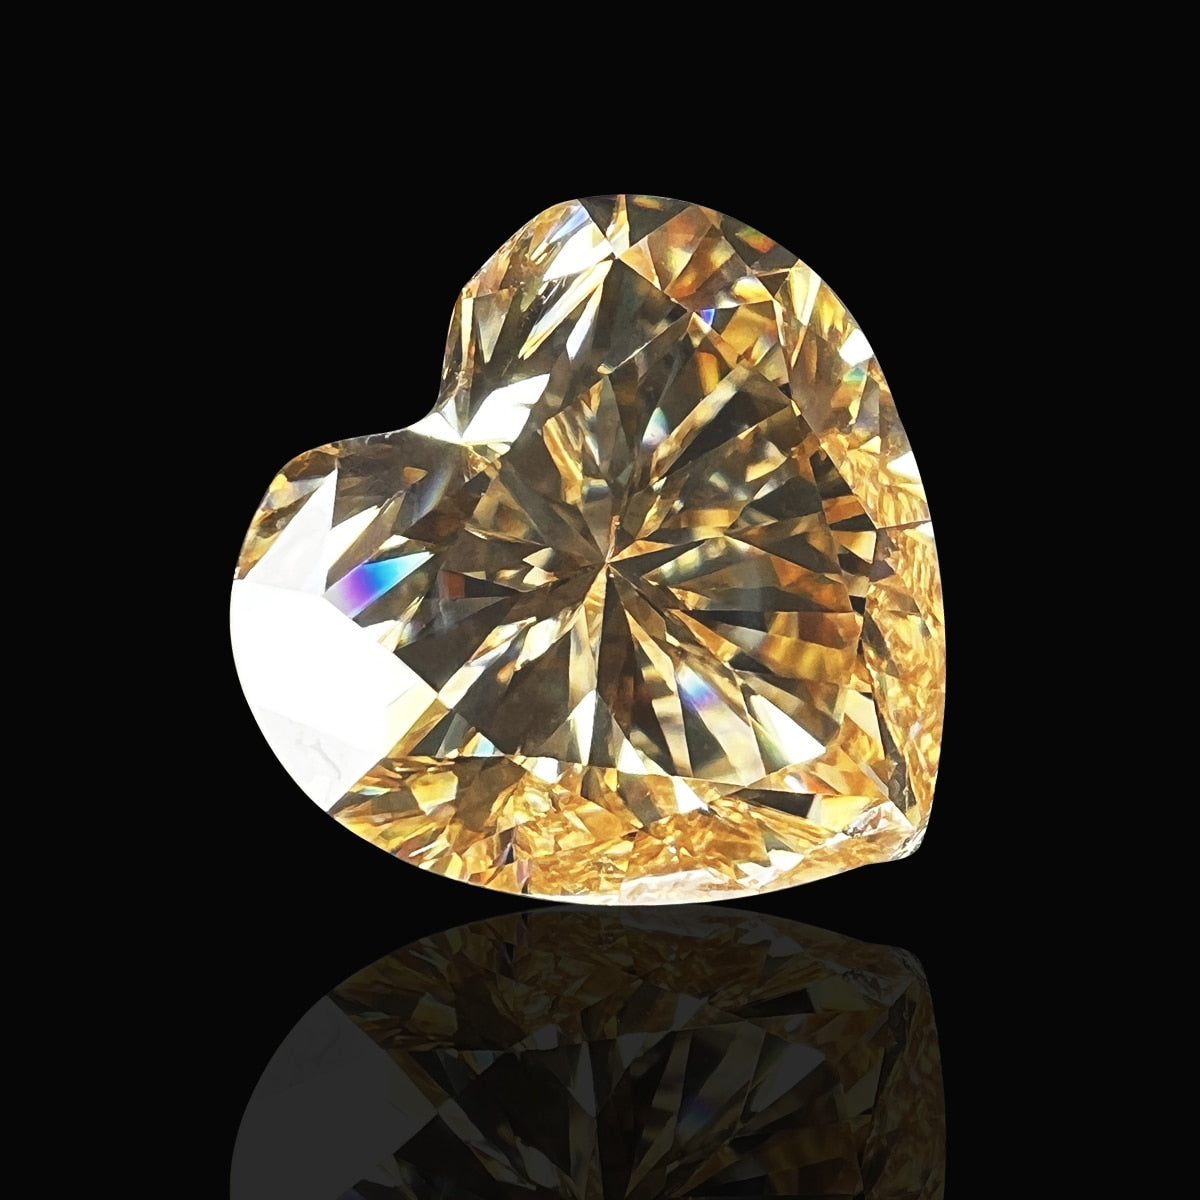 Heart Cut. Colored, Loose Moissanite Gems. 0.50ct to 3.0 Carat.